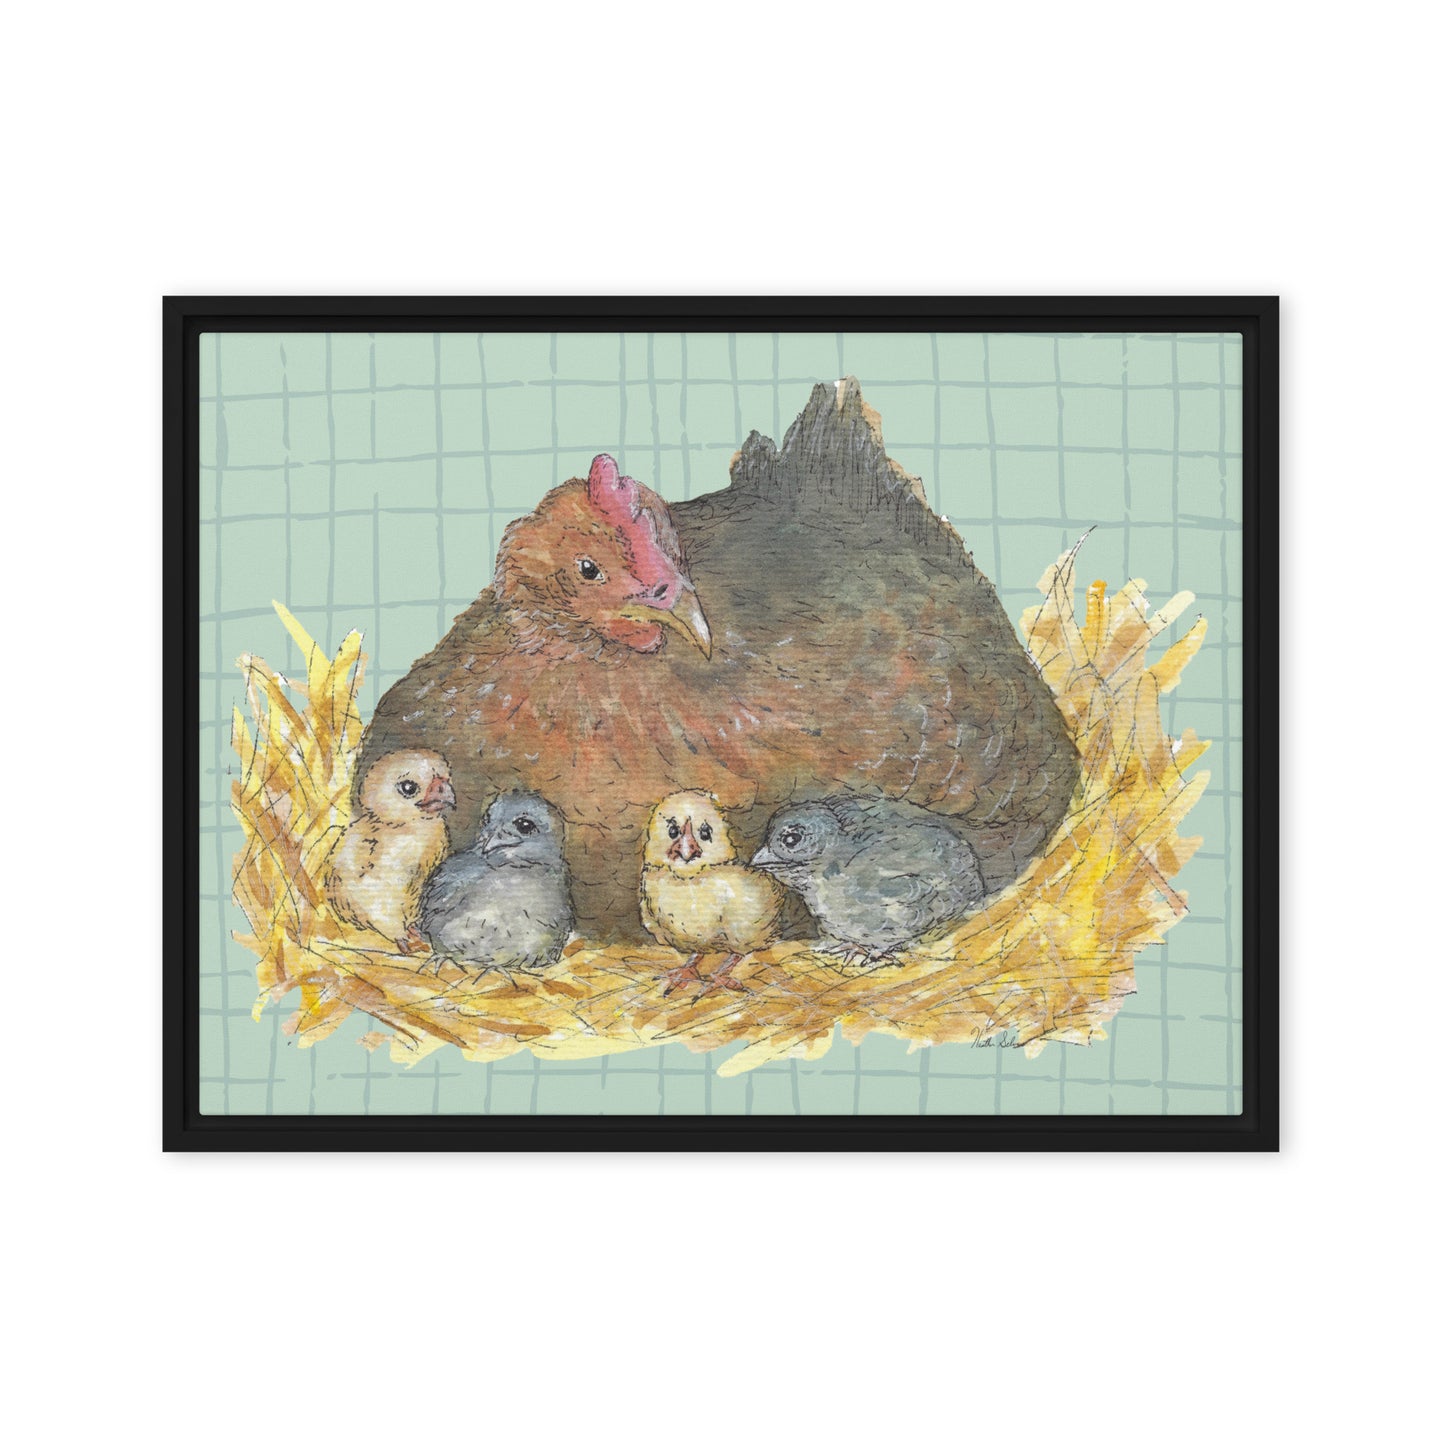 18 by 24 inch Mother Hen Floating Frame Canvas Wall Art. Heather Silver's watercolor painting, Mother Hen, with a green crosshatched background, printed on a stretched canvas and framed with a dark black pine frame. Hanging hardware included.